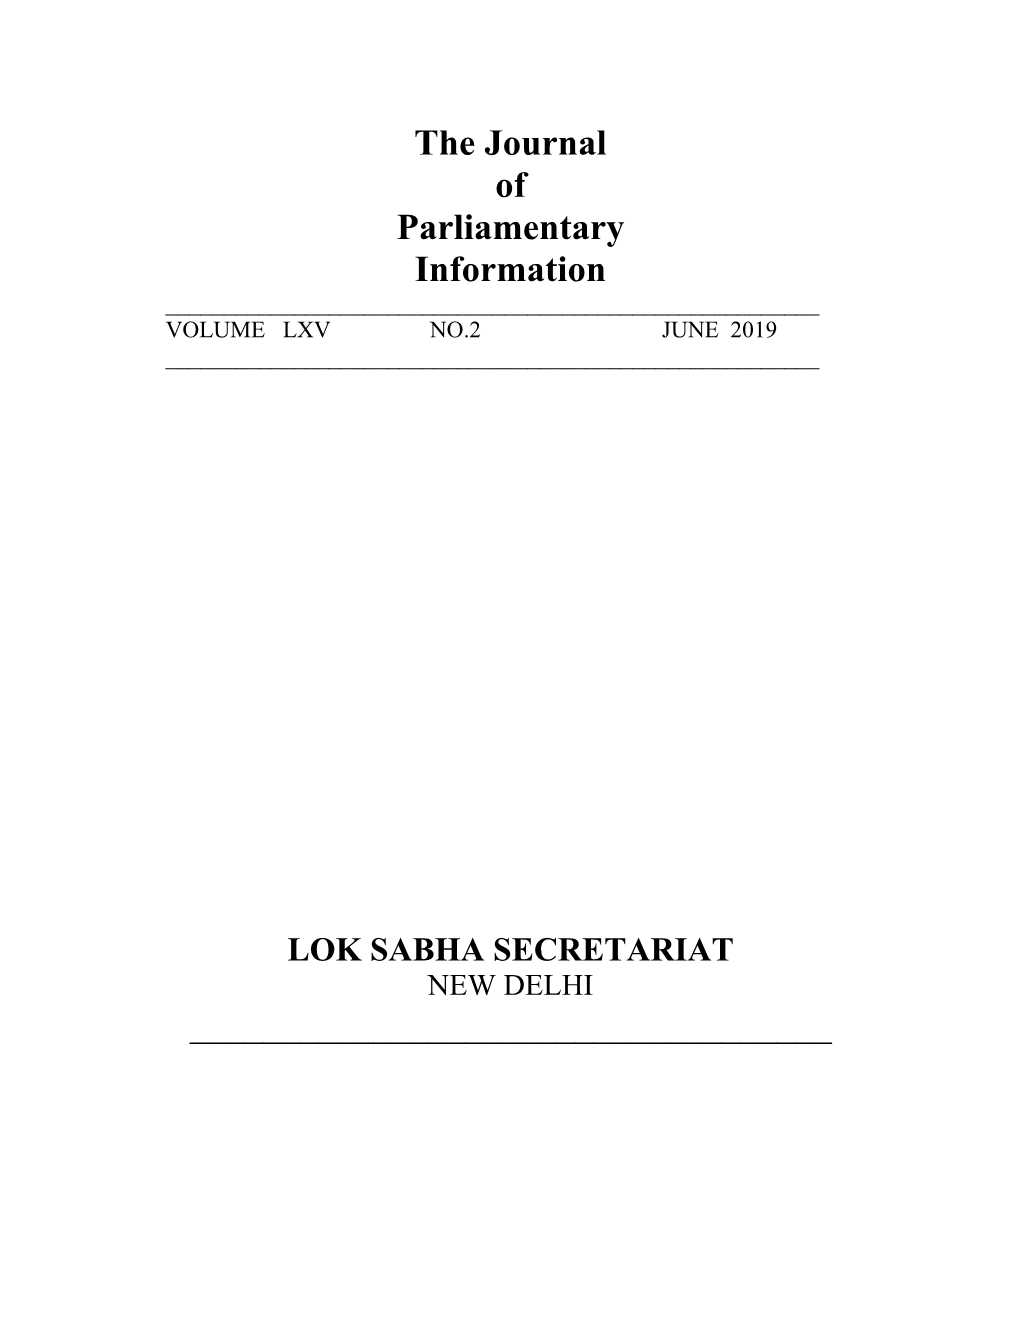 The Journal of Parliamentary Information ______VOLUME LXV NO.2 JUNE 2019 ______